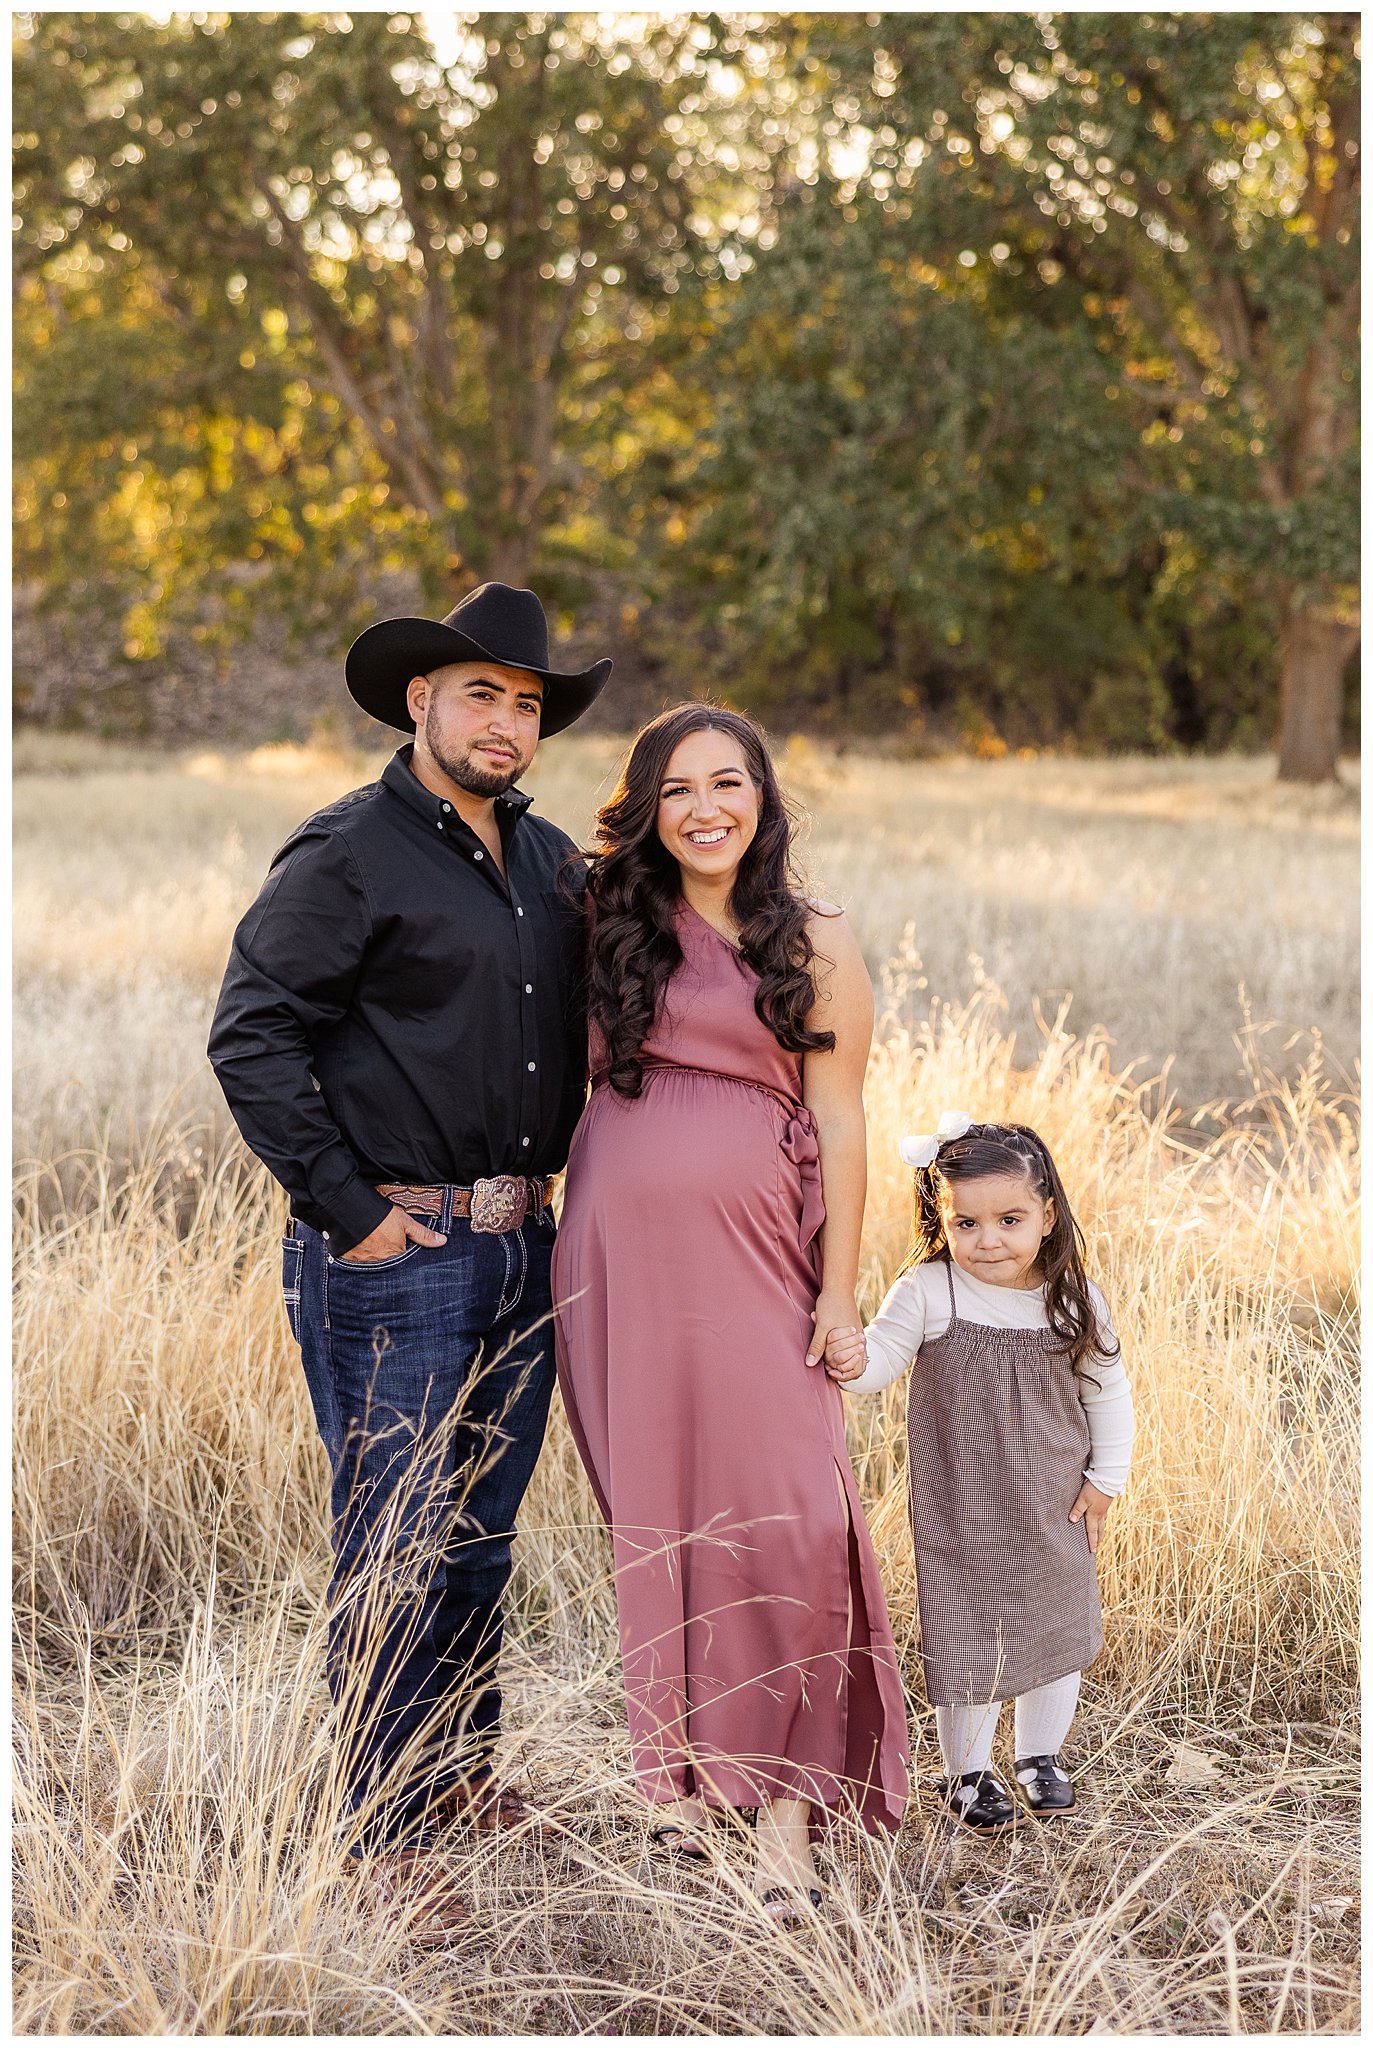 Grass Field Family Maternity Session Couple Chico CA Fall October Pink Dress Black Cowboy Hat,